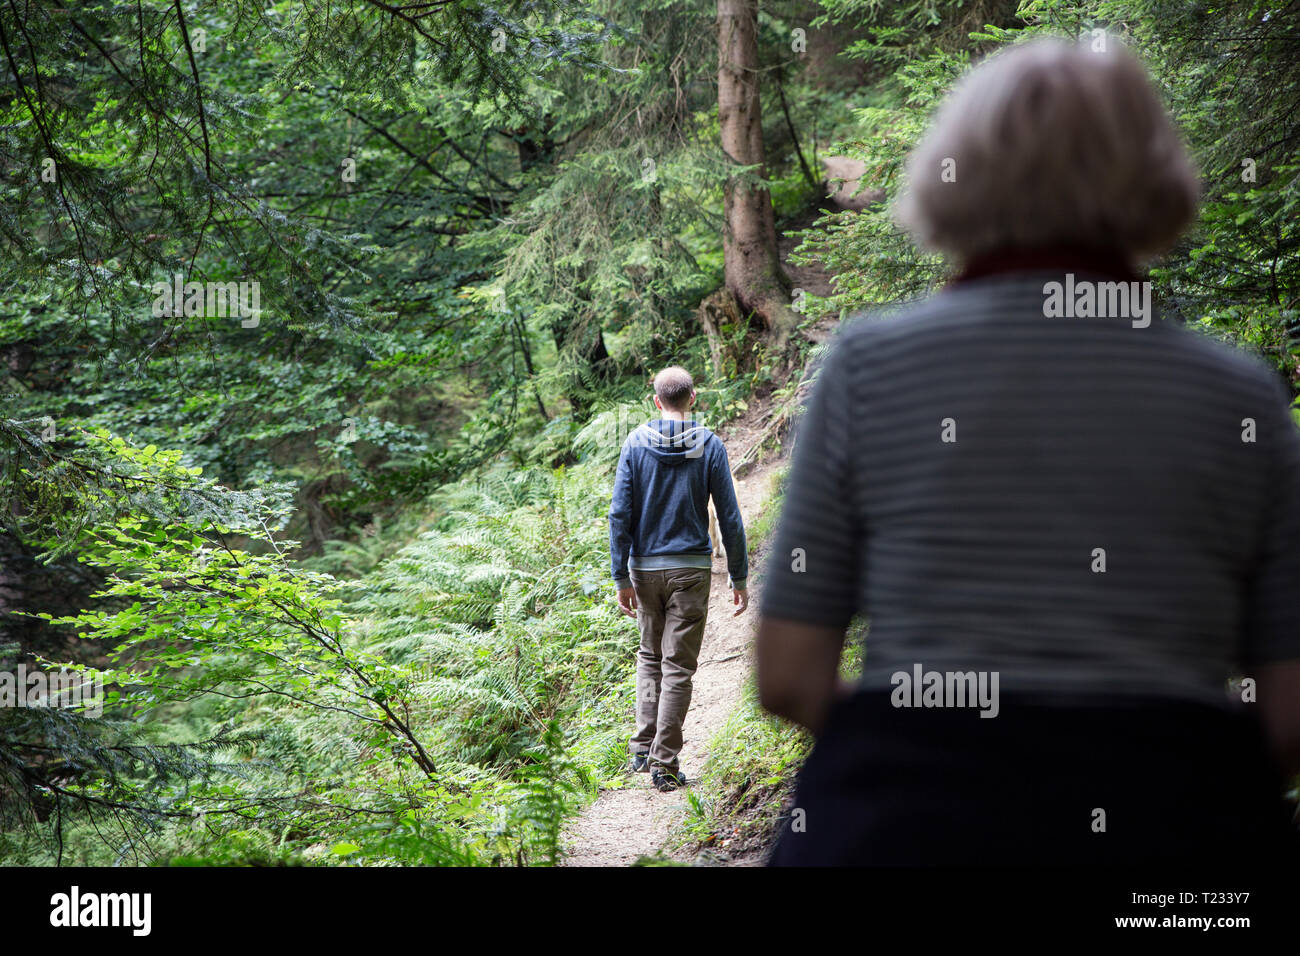 Austria, Tyrol, Kaiser mountains, mother and adult son hiking in forest Stock Photo